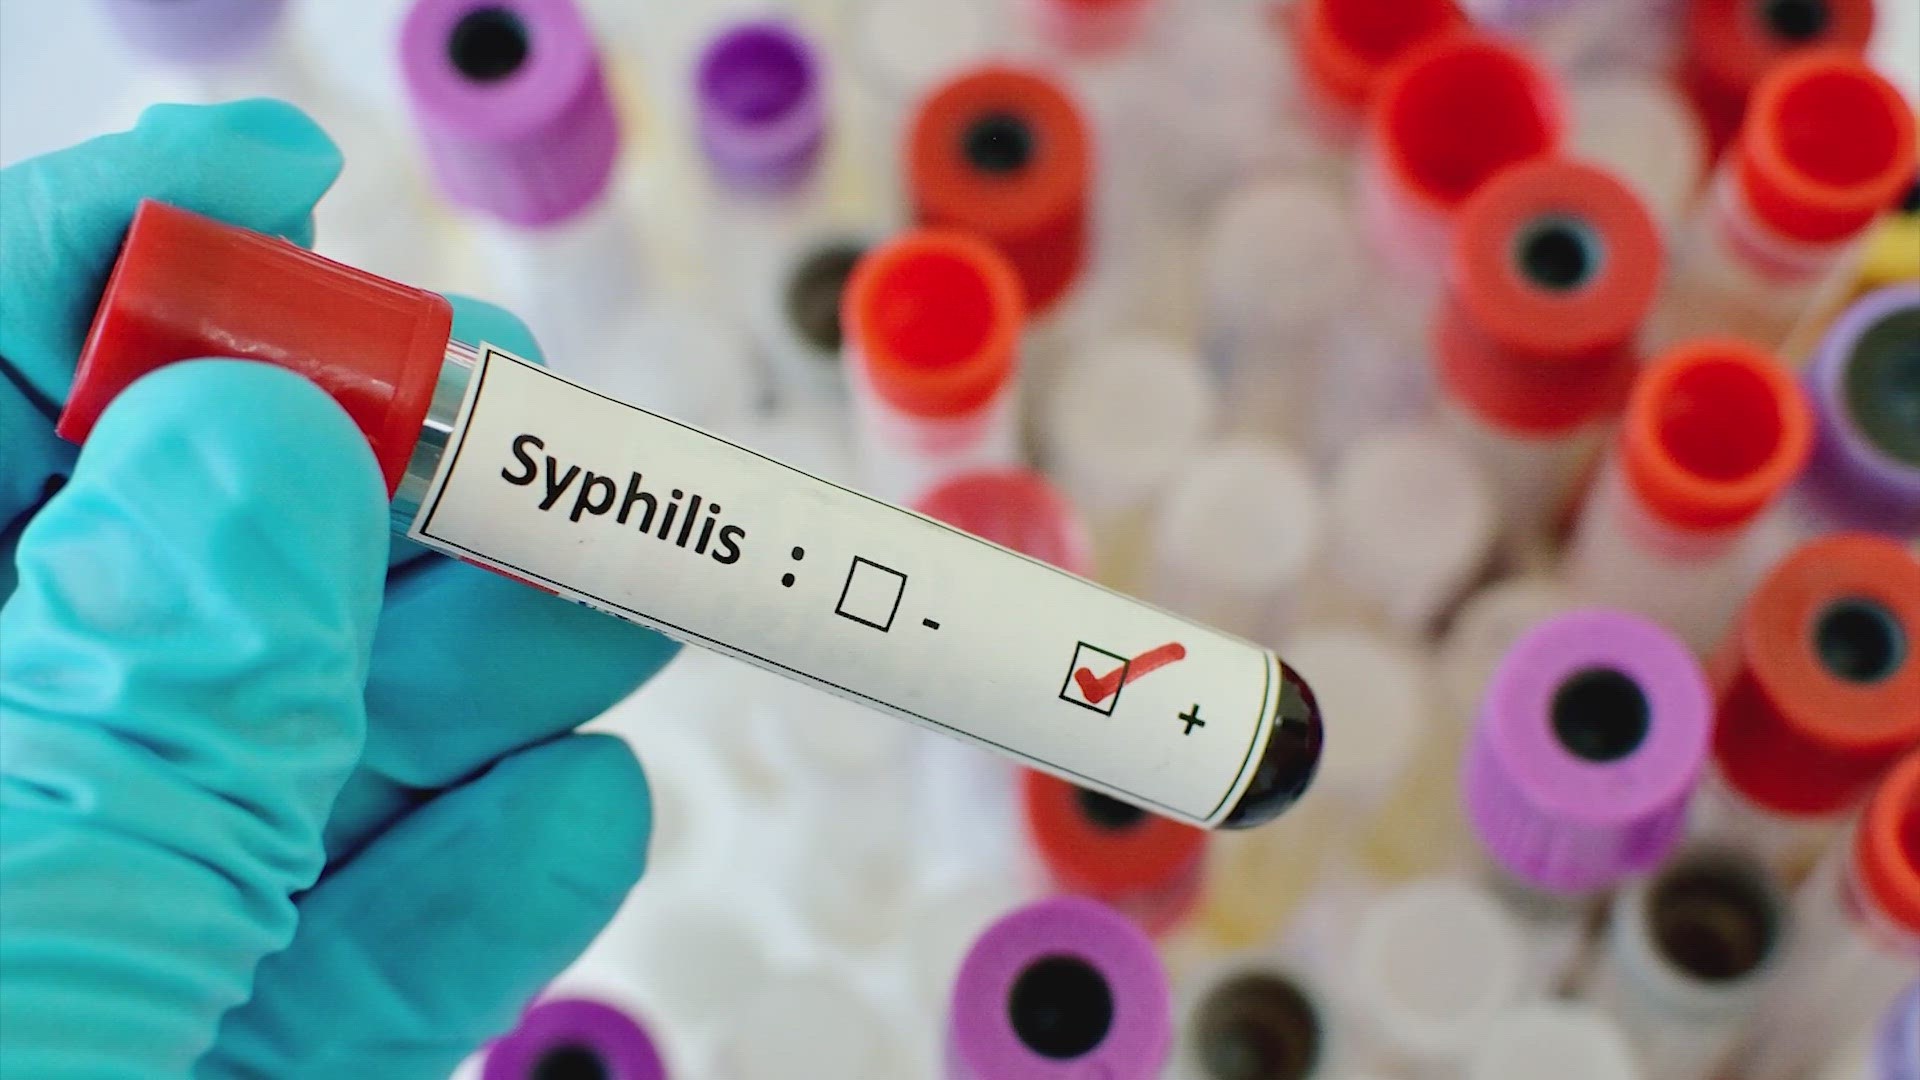 Congenital syphilis is when an unborn mother with syphilis passes the infection on to her baby during pregnancy. In Houston, congenital syphilis rose drastically.